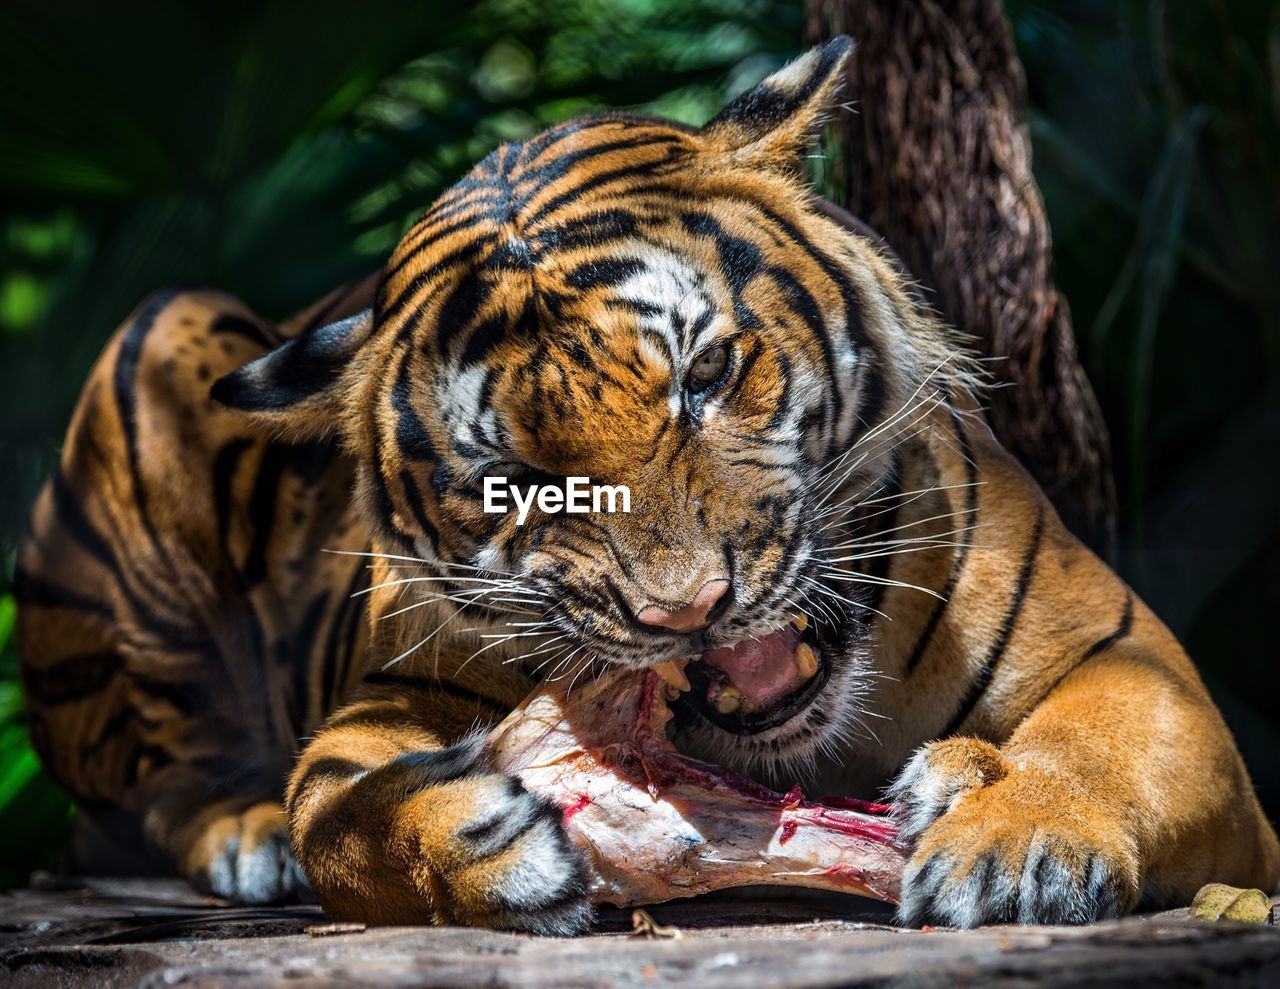 Portrait of tiger eating meat at zoo